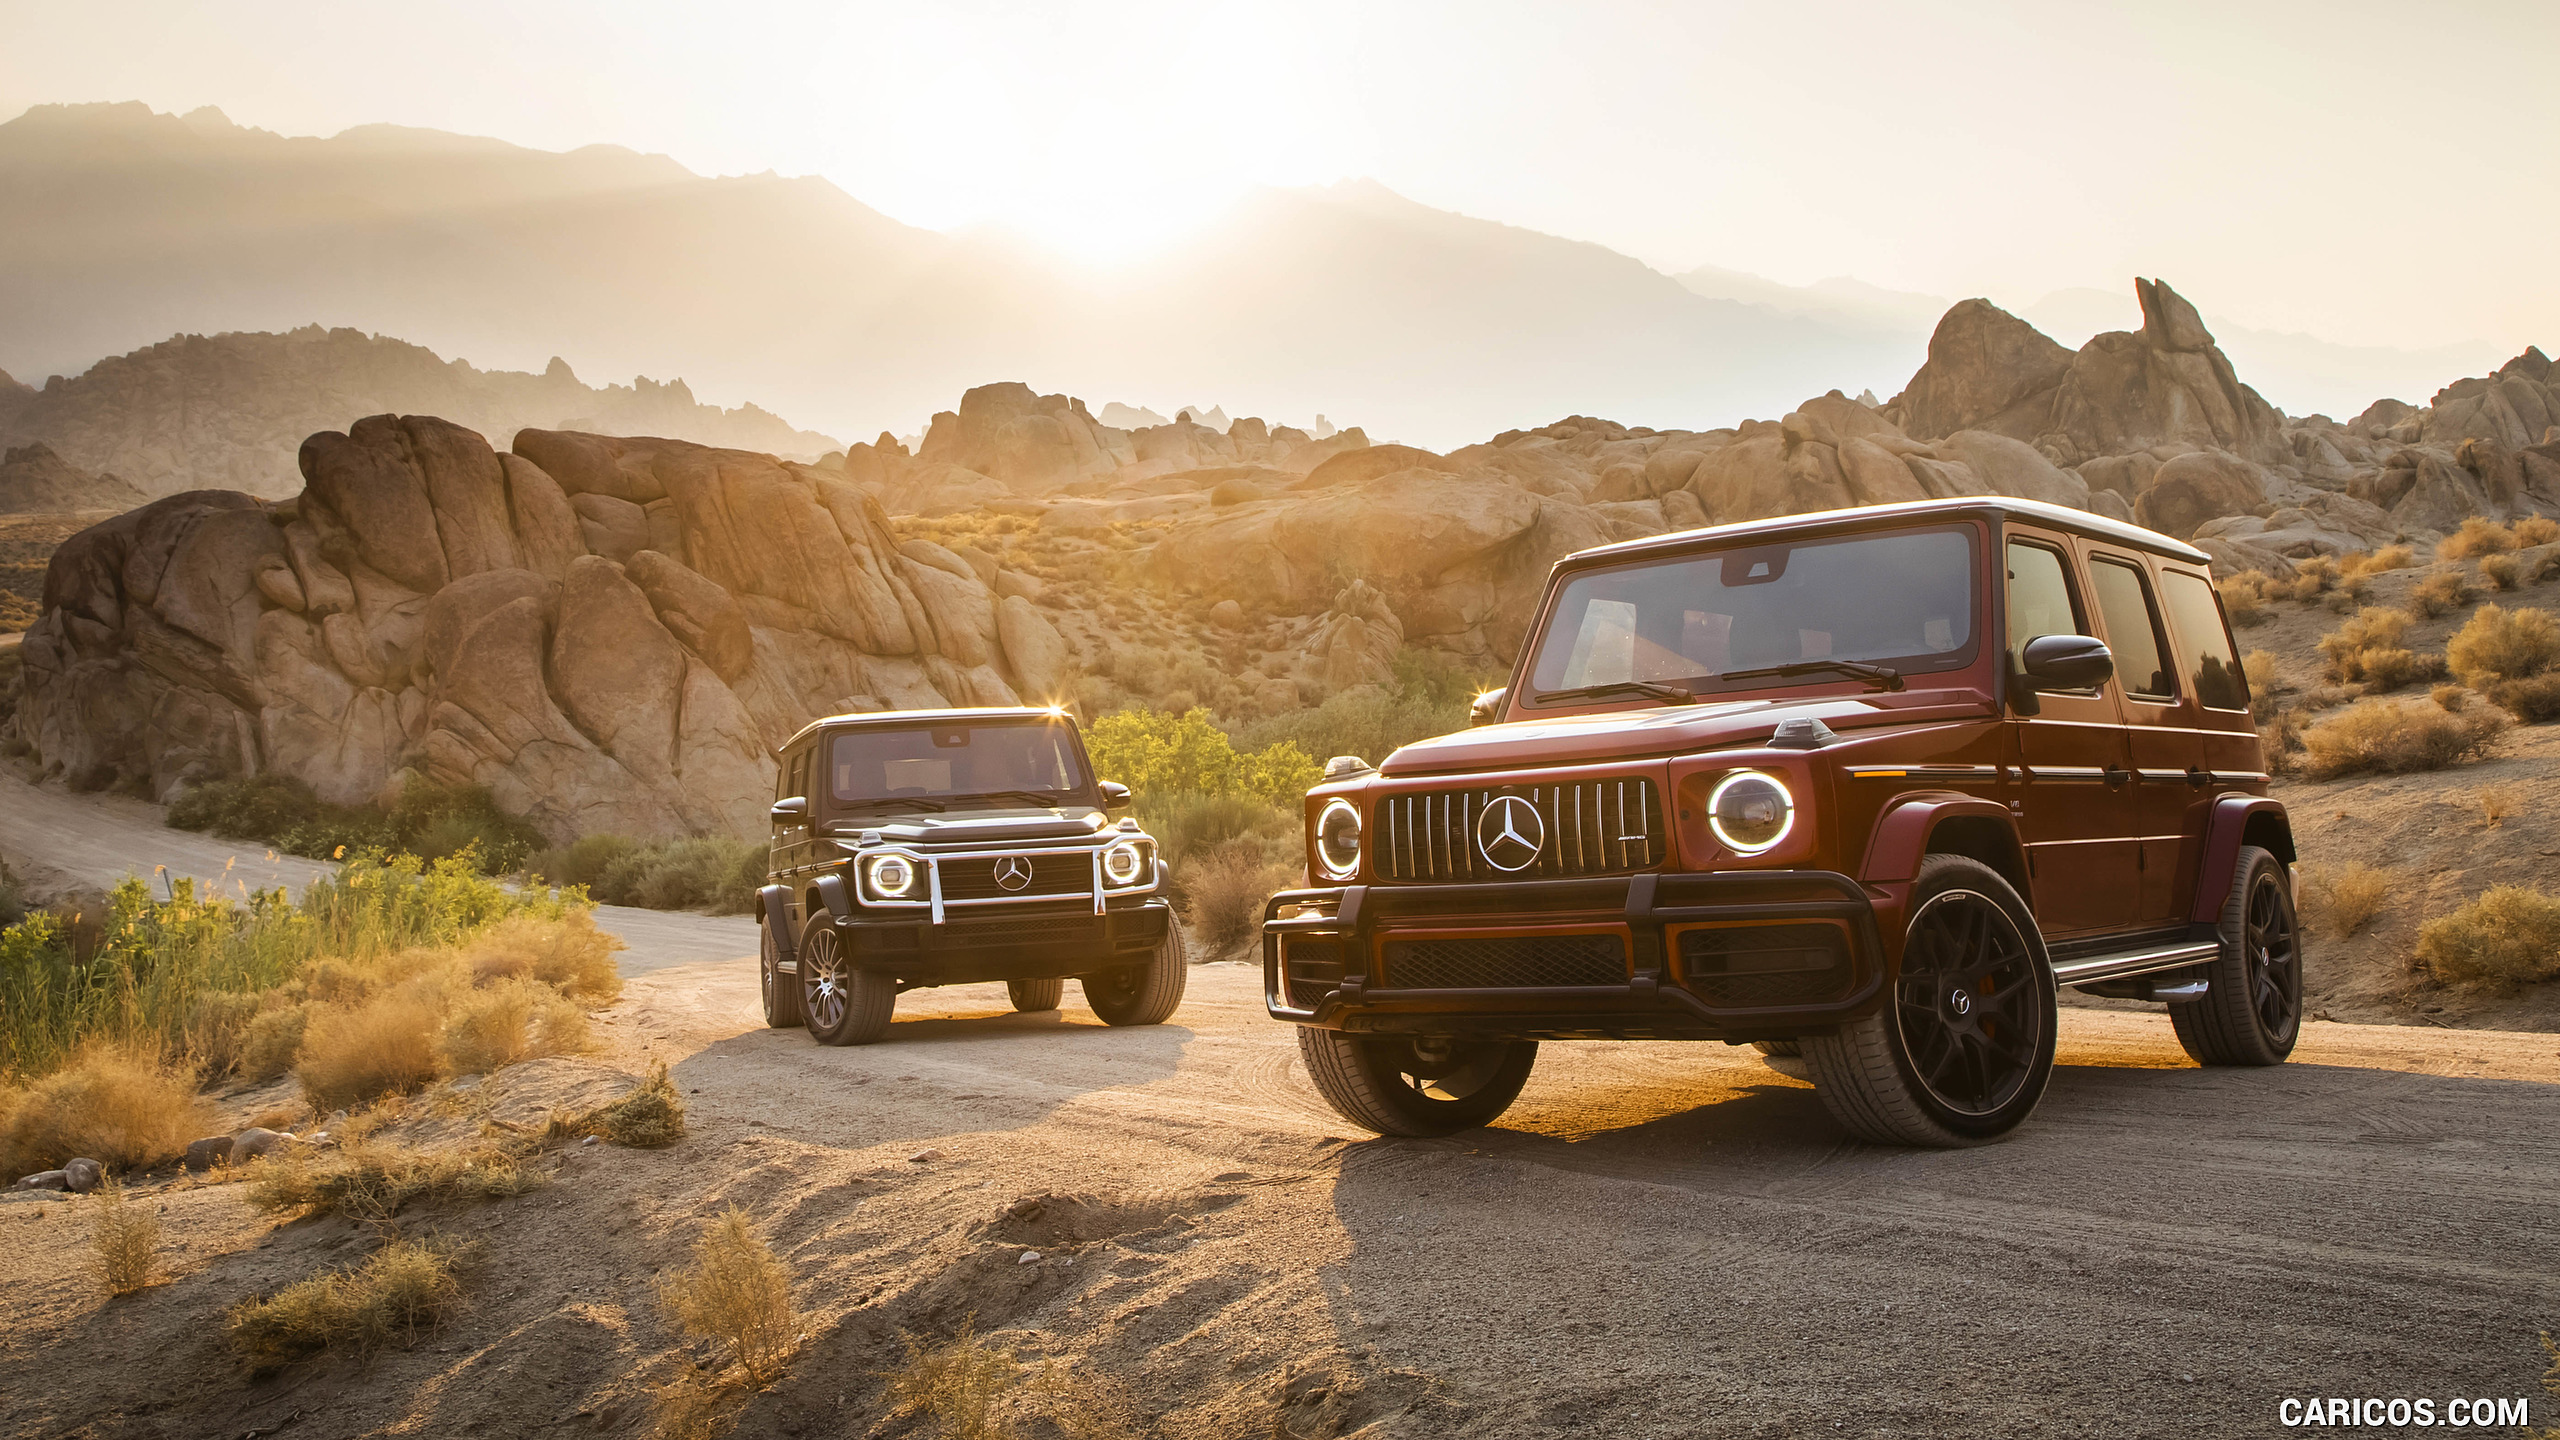 2019 Mercedes-AMG G63 (U.S.-Spec) and 2019 G550, #348 of 452